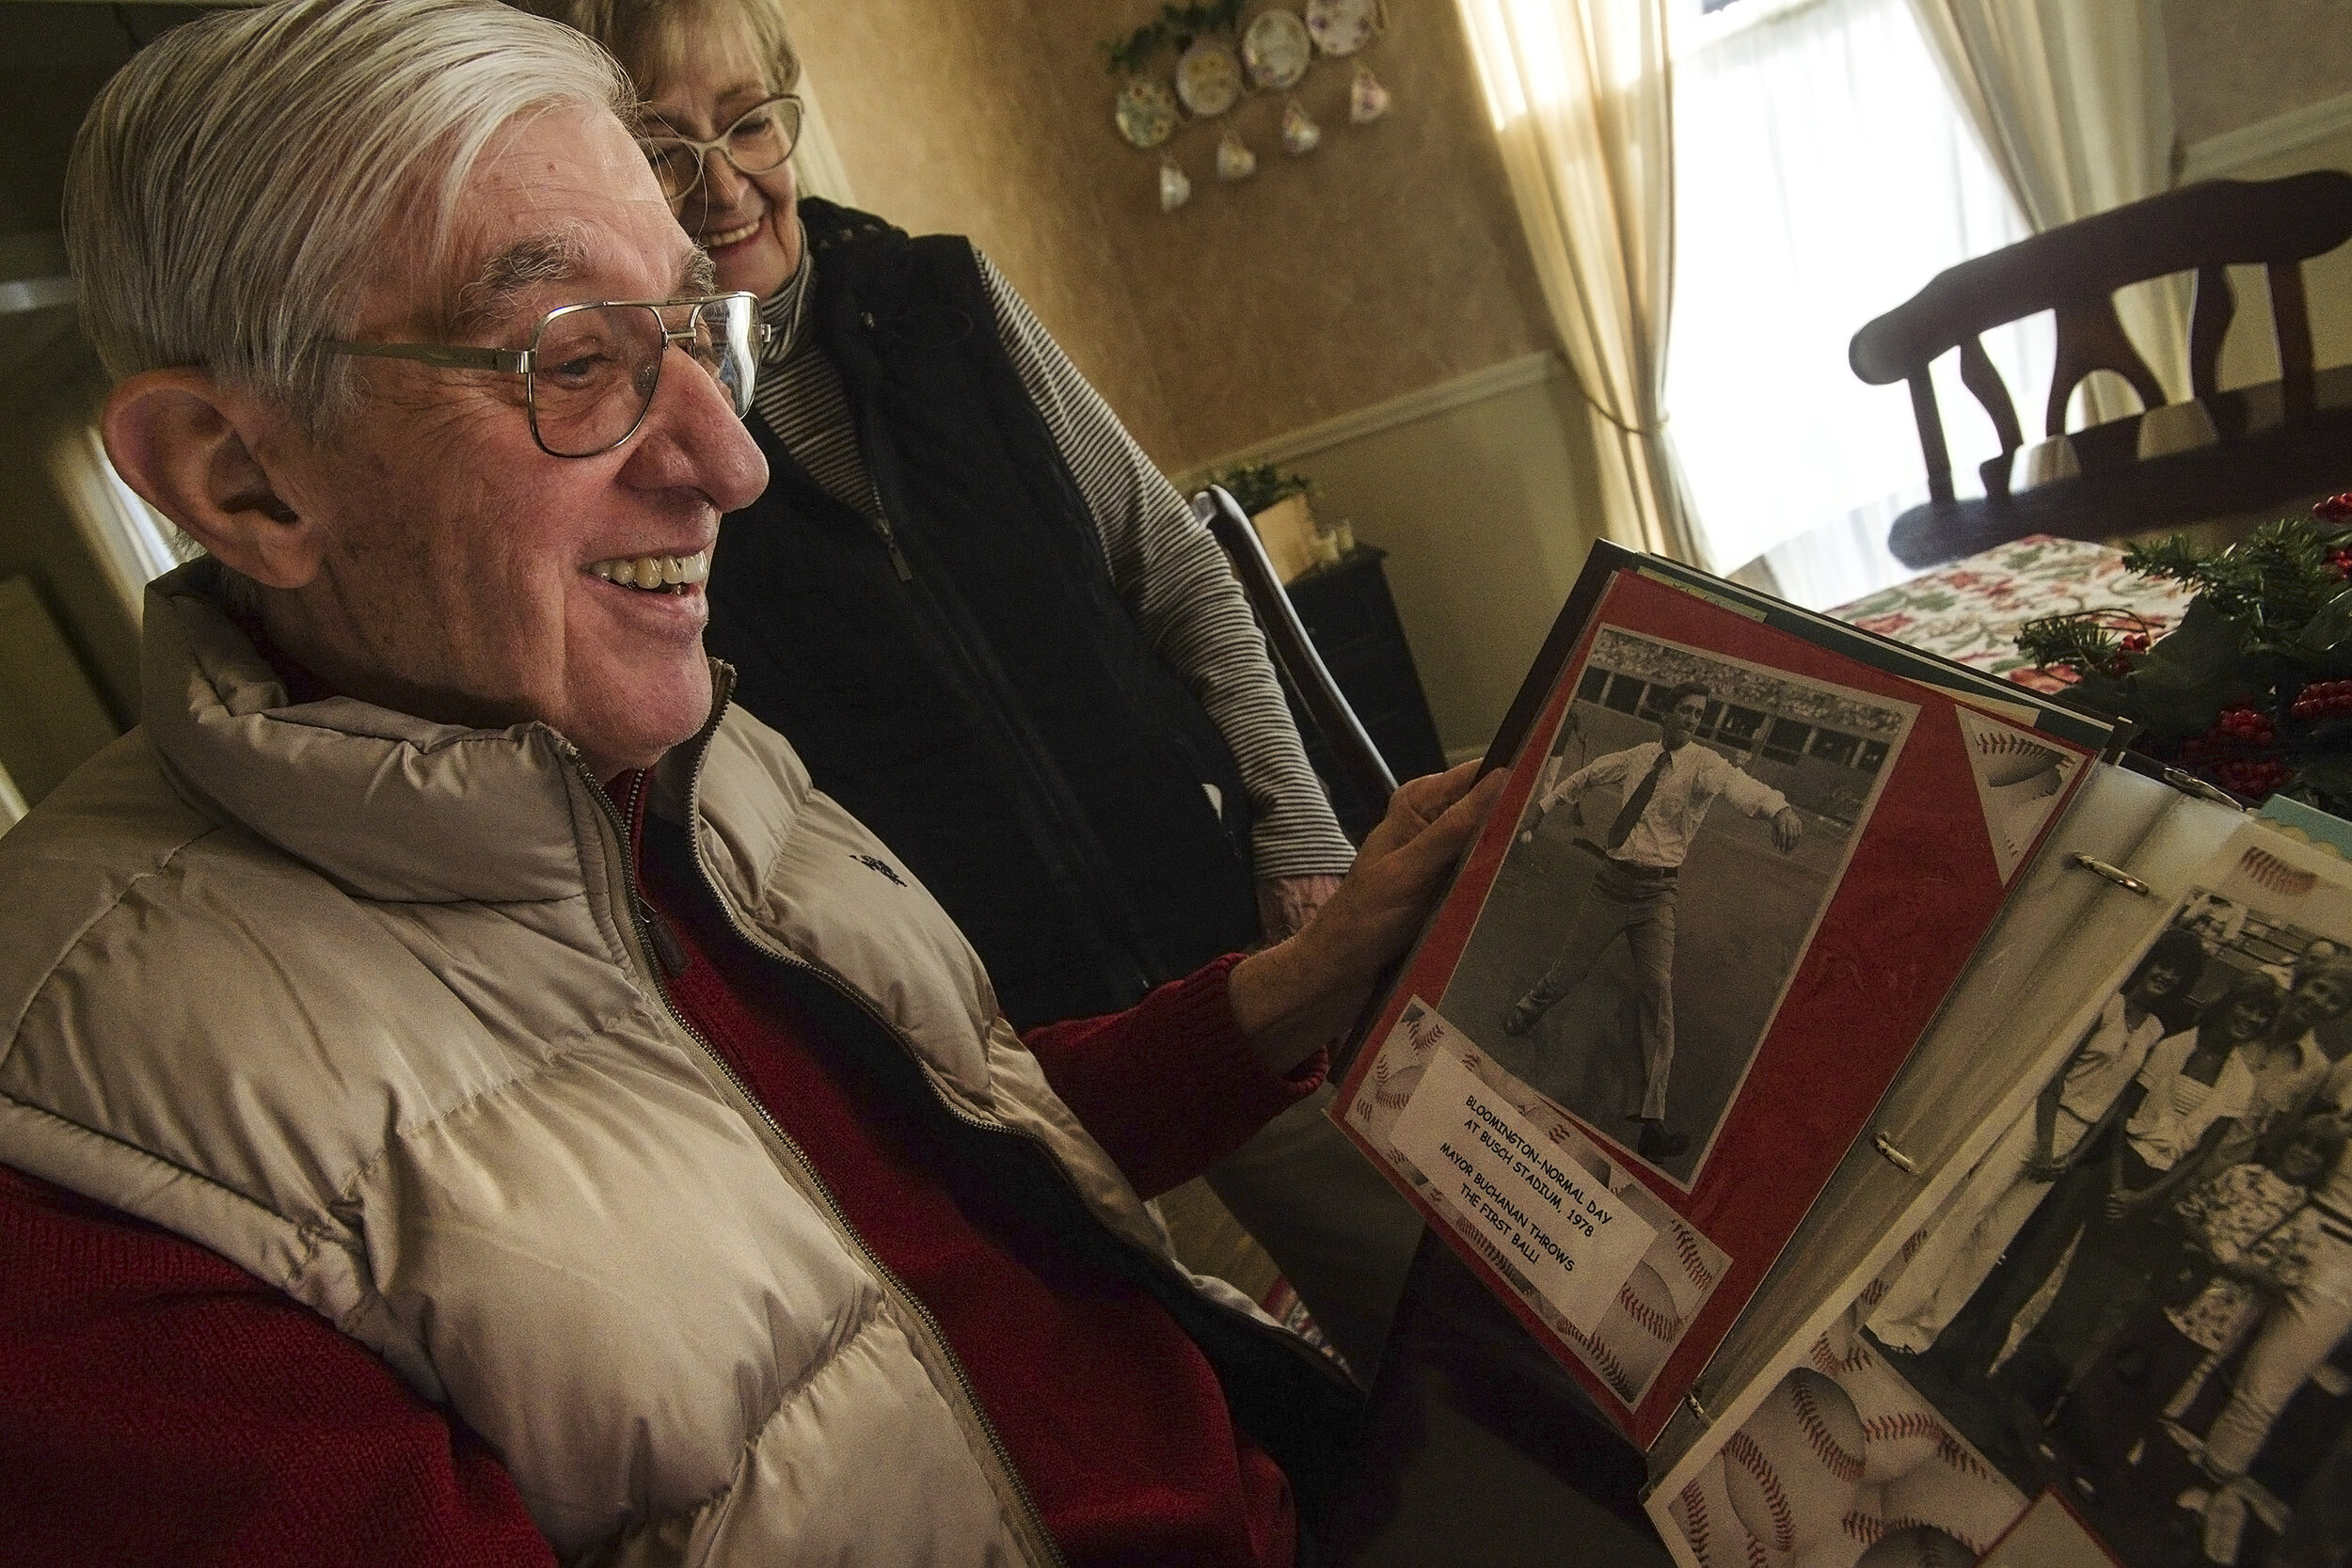  Rich Buchanan and his wife, Judy, react as they find a photo of a younger Rich in a scrapbook on Friday, Feb. 2, 2018, at their home in Bloomington, Illinois. Judy Buchanan said the scrapbook allows them to have fun reminiscing and celebrating what 